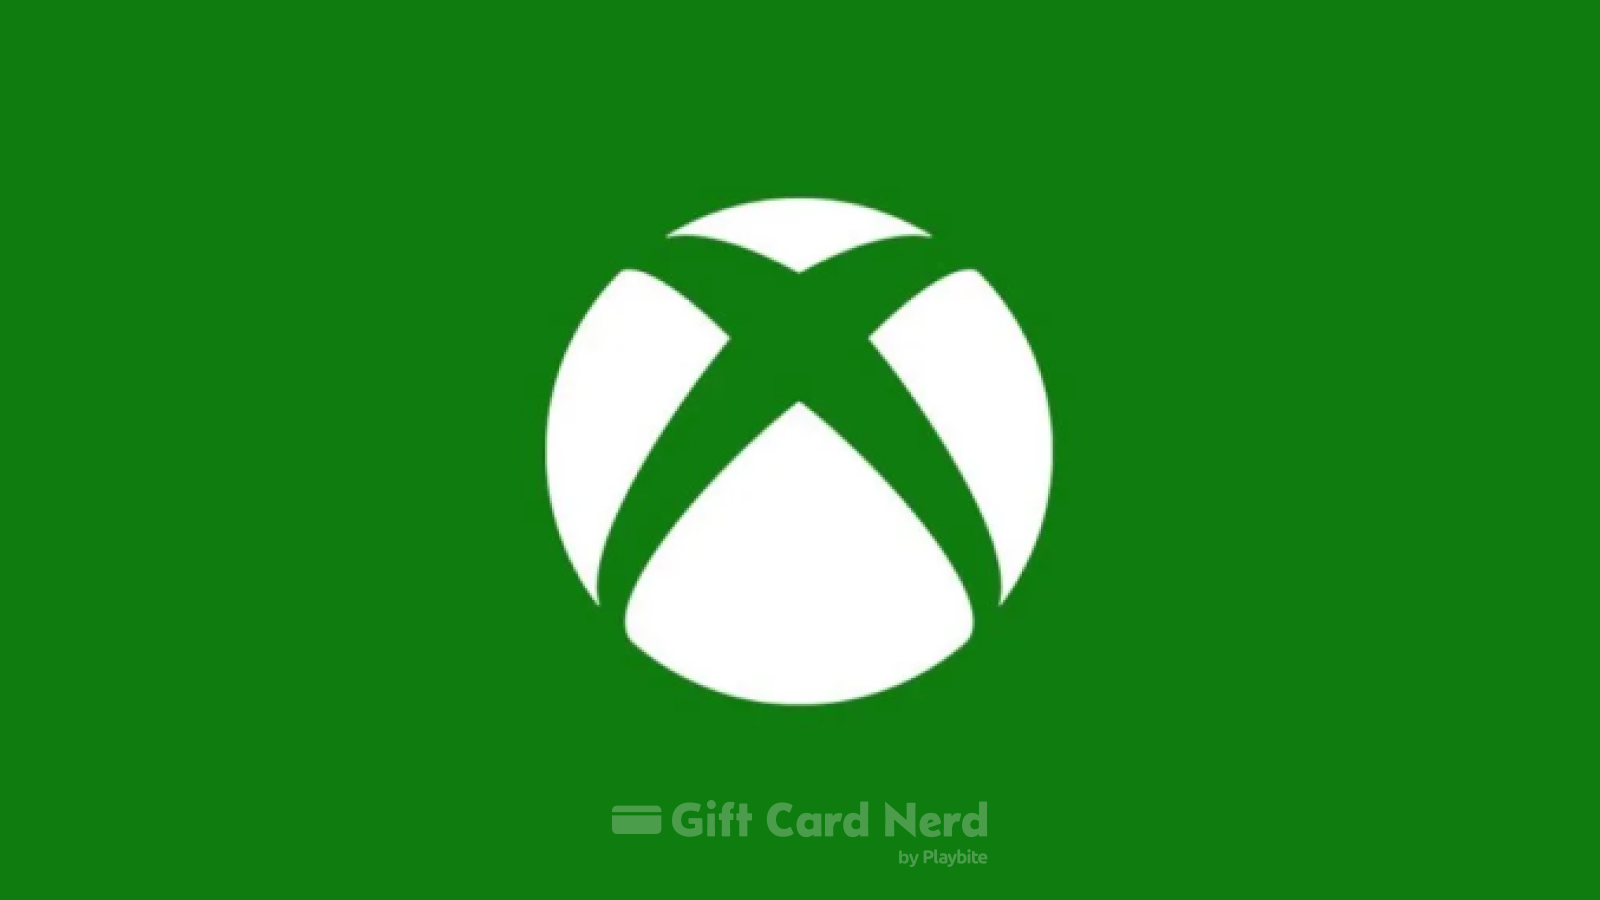 Does Target sell Xbox gift cards?